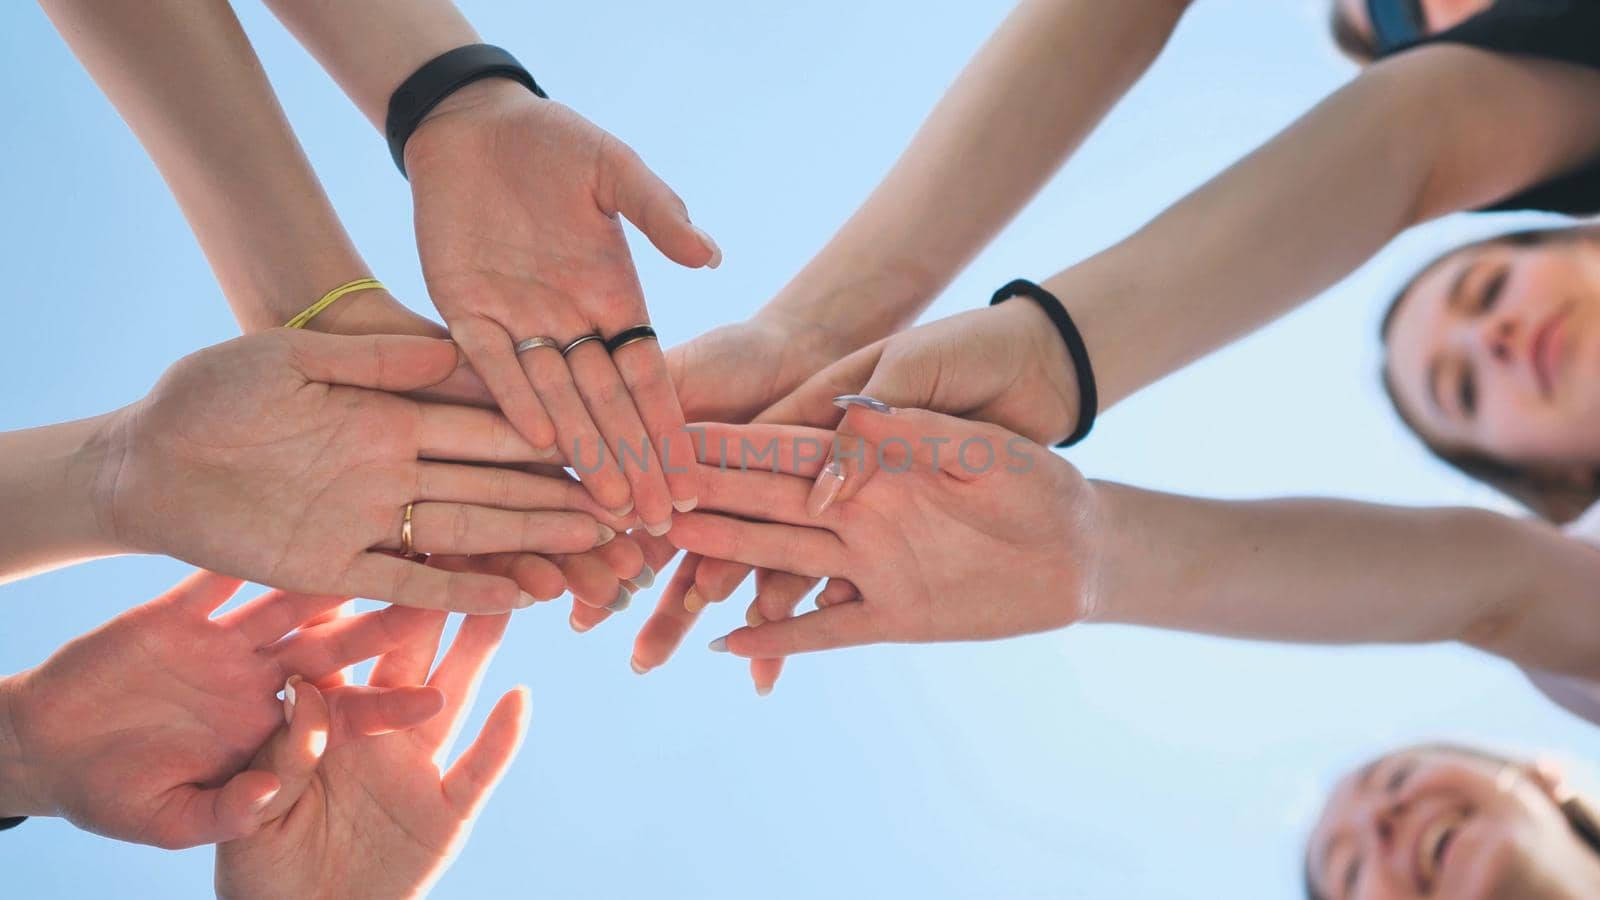 Cheerful girls join hands together as a sign of unity and joint successful work. Teamwork stacking hand concept